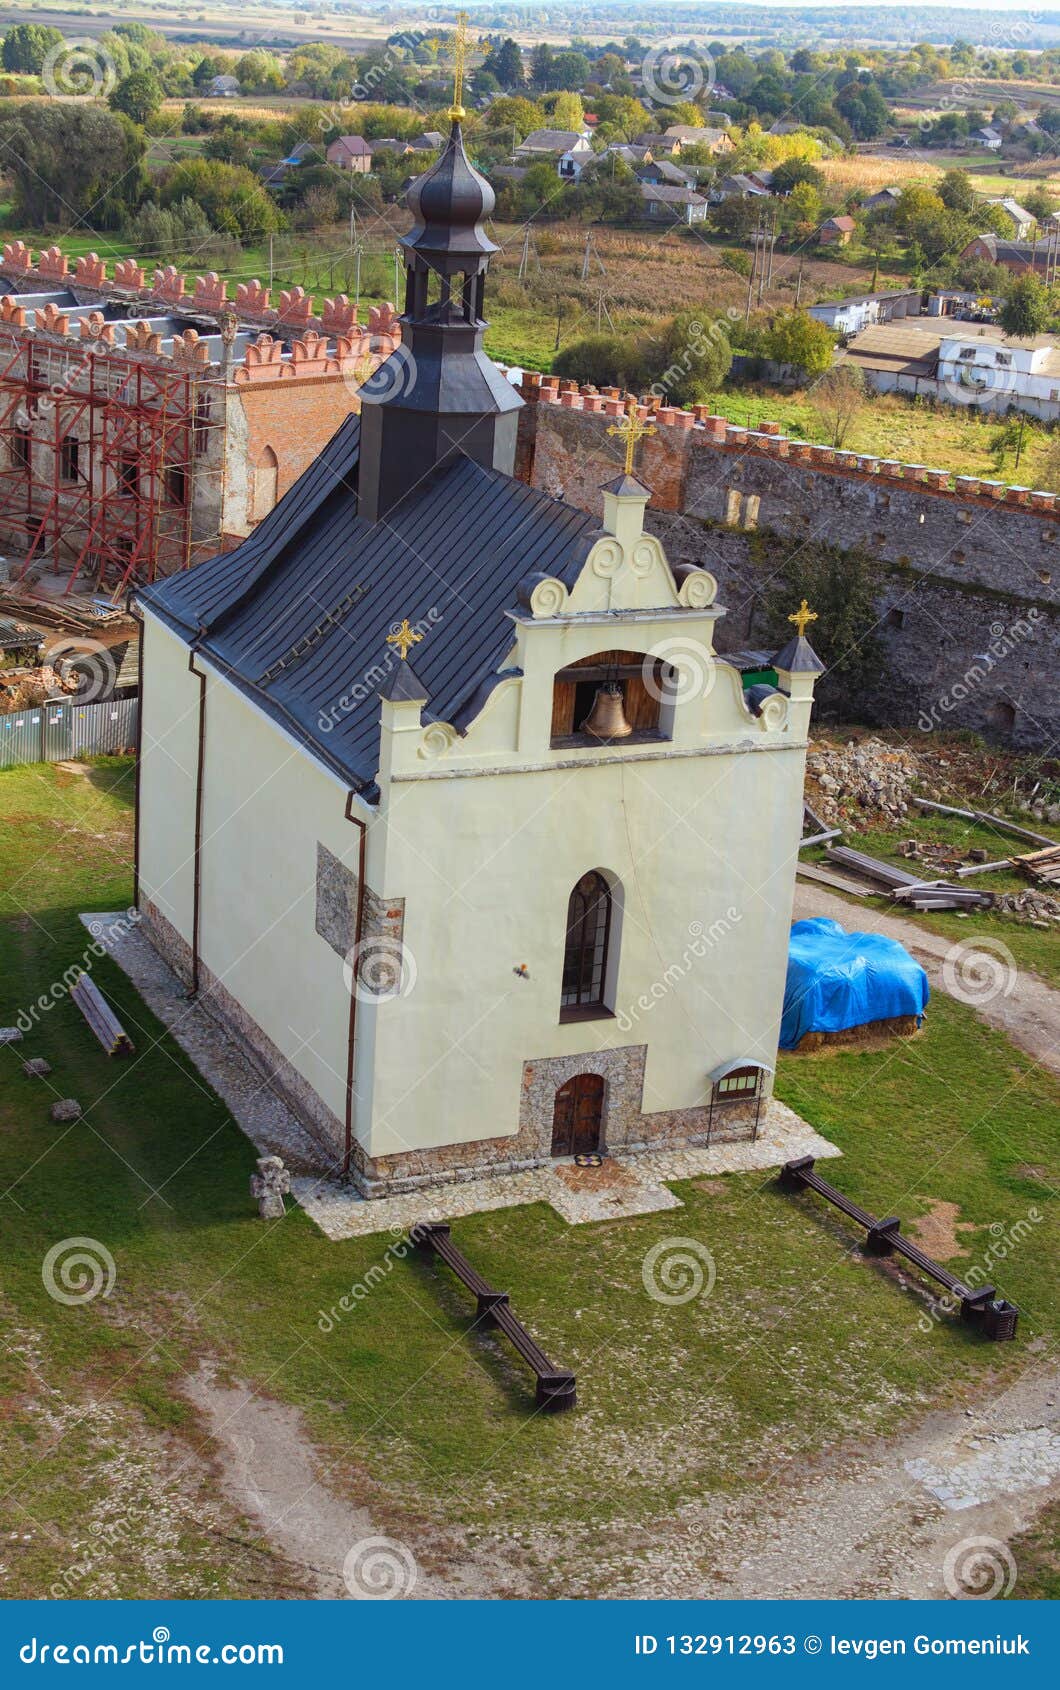 aerial view of saint nicholas church in medzhybizh castle. fortress built as a bulwark against ottoman expansion in the 1540s.